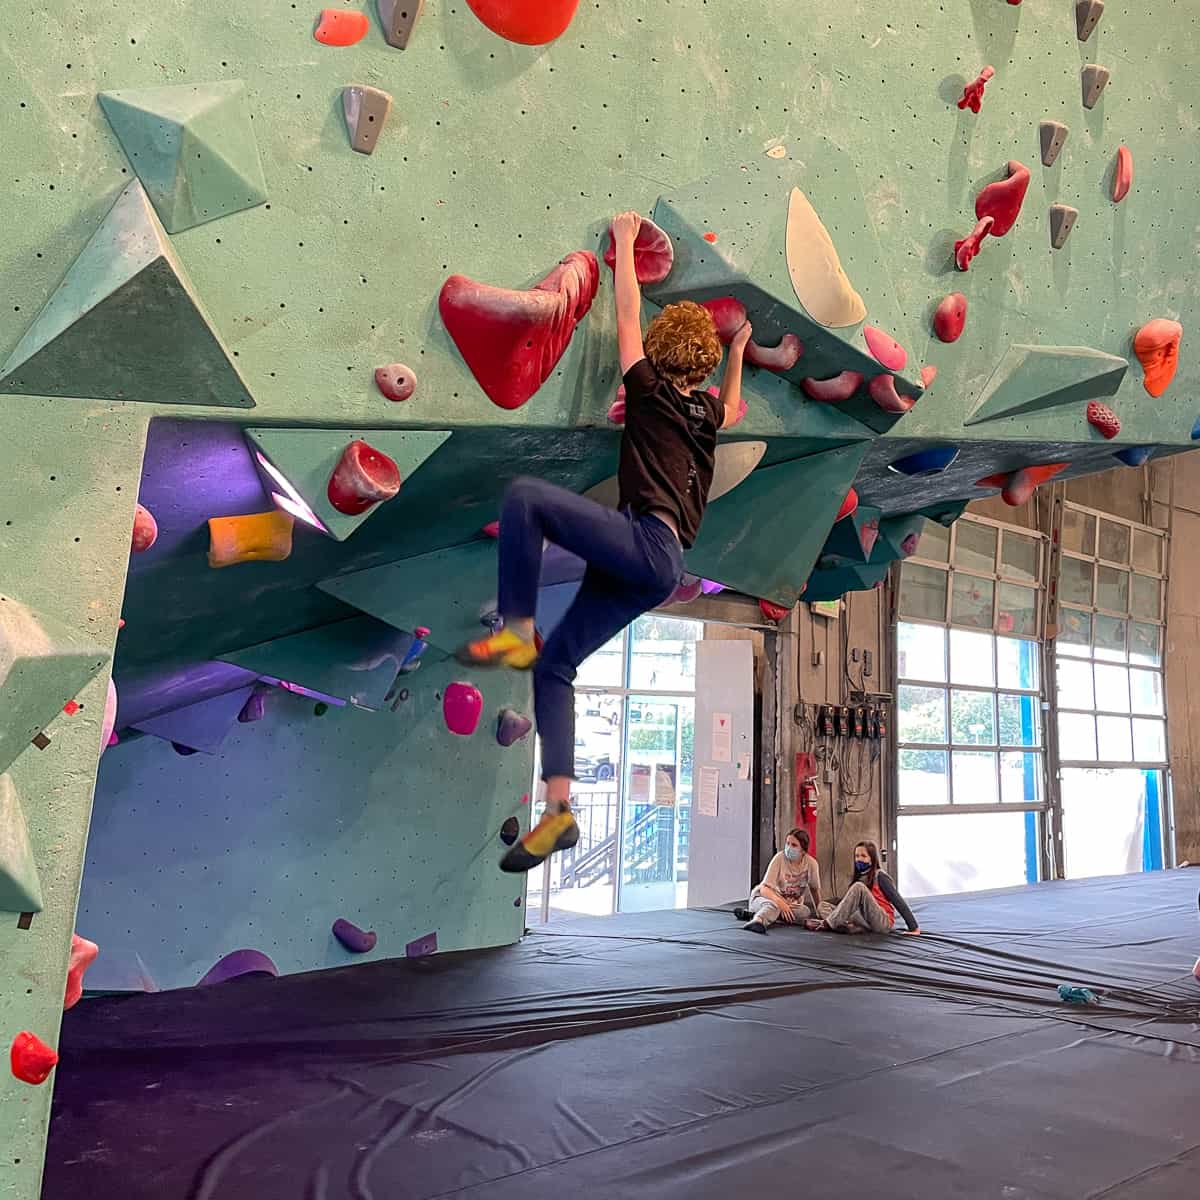 bouldering on overhang over wall to wall padding in climbing gym